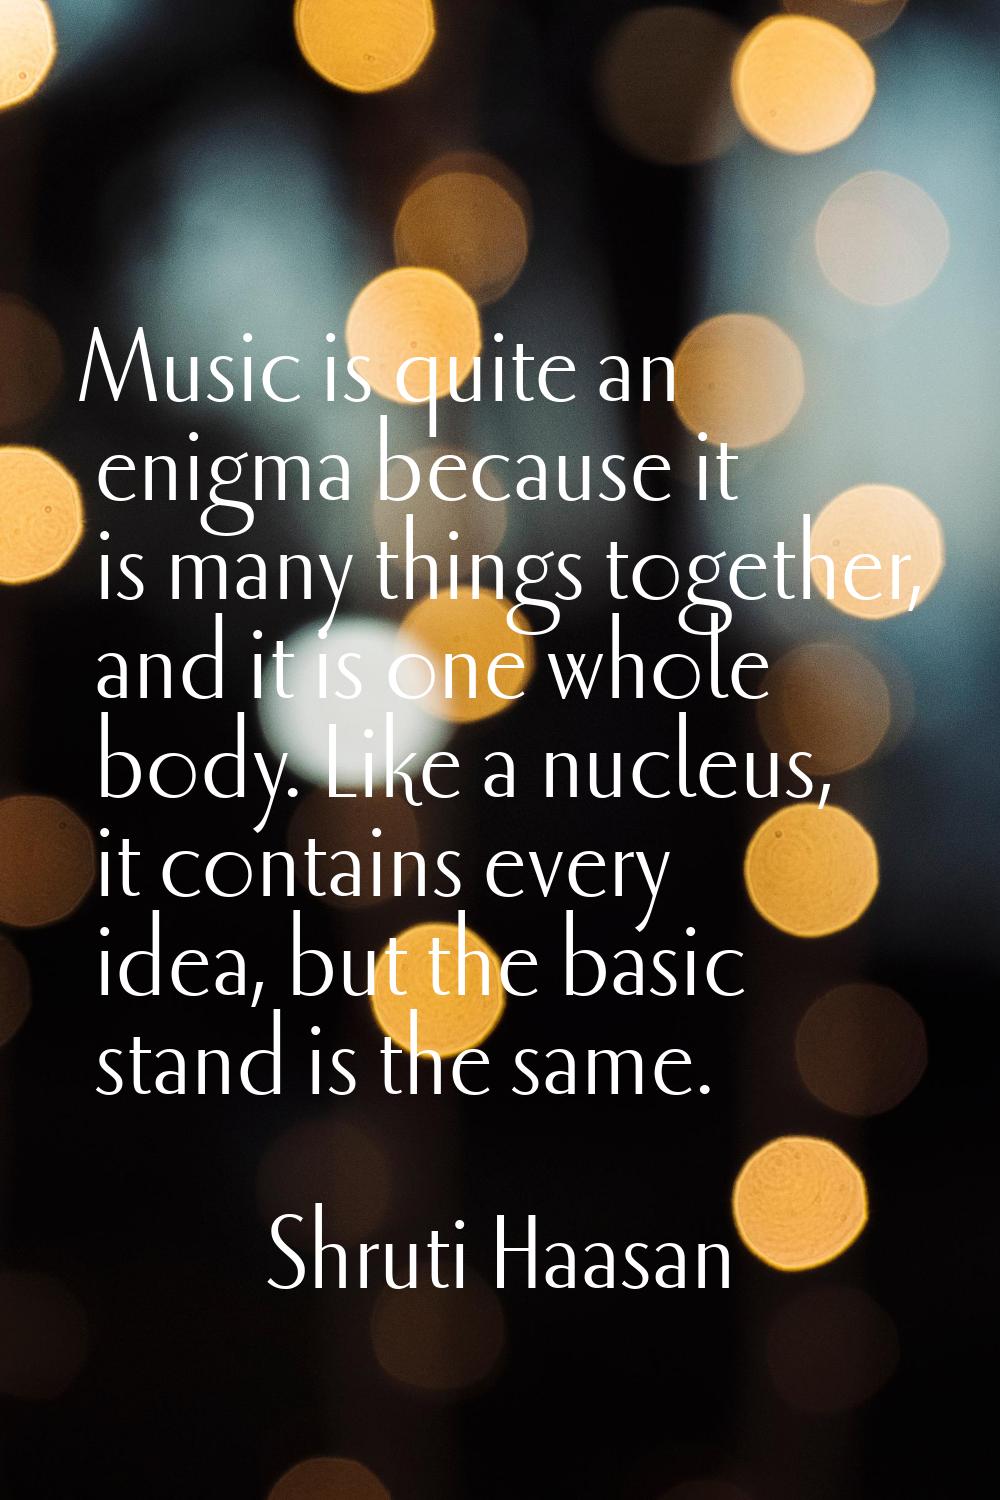 Music is quite an enigma because it is many things together, and it is one whole body. Like a nucle